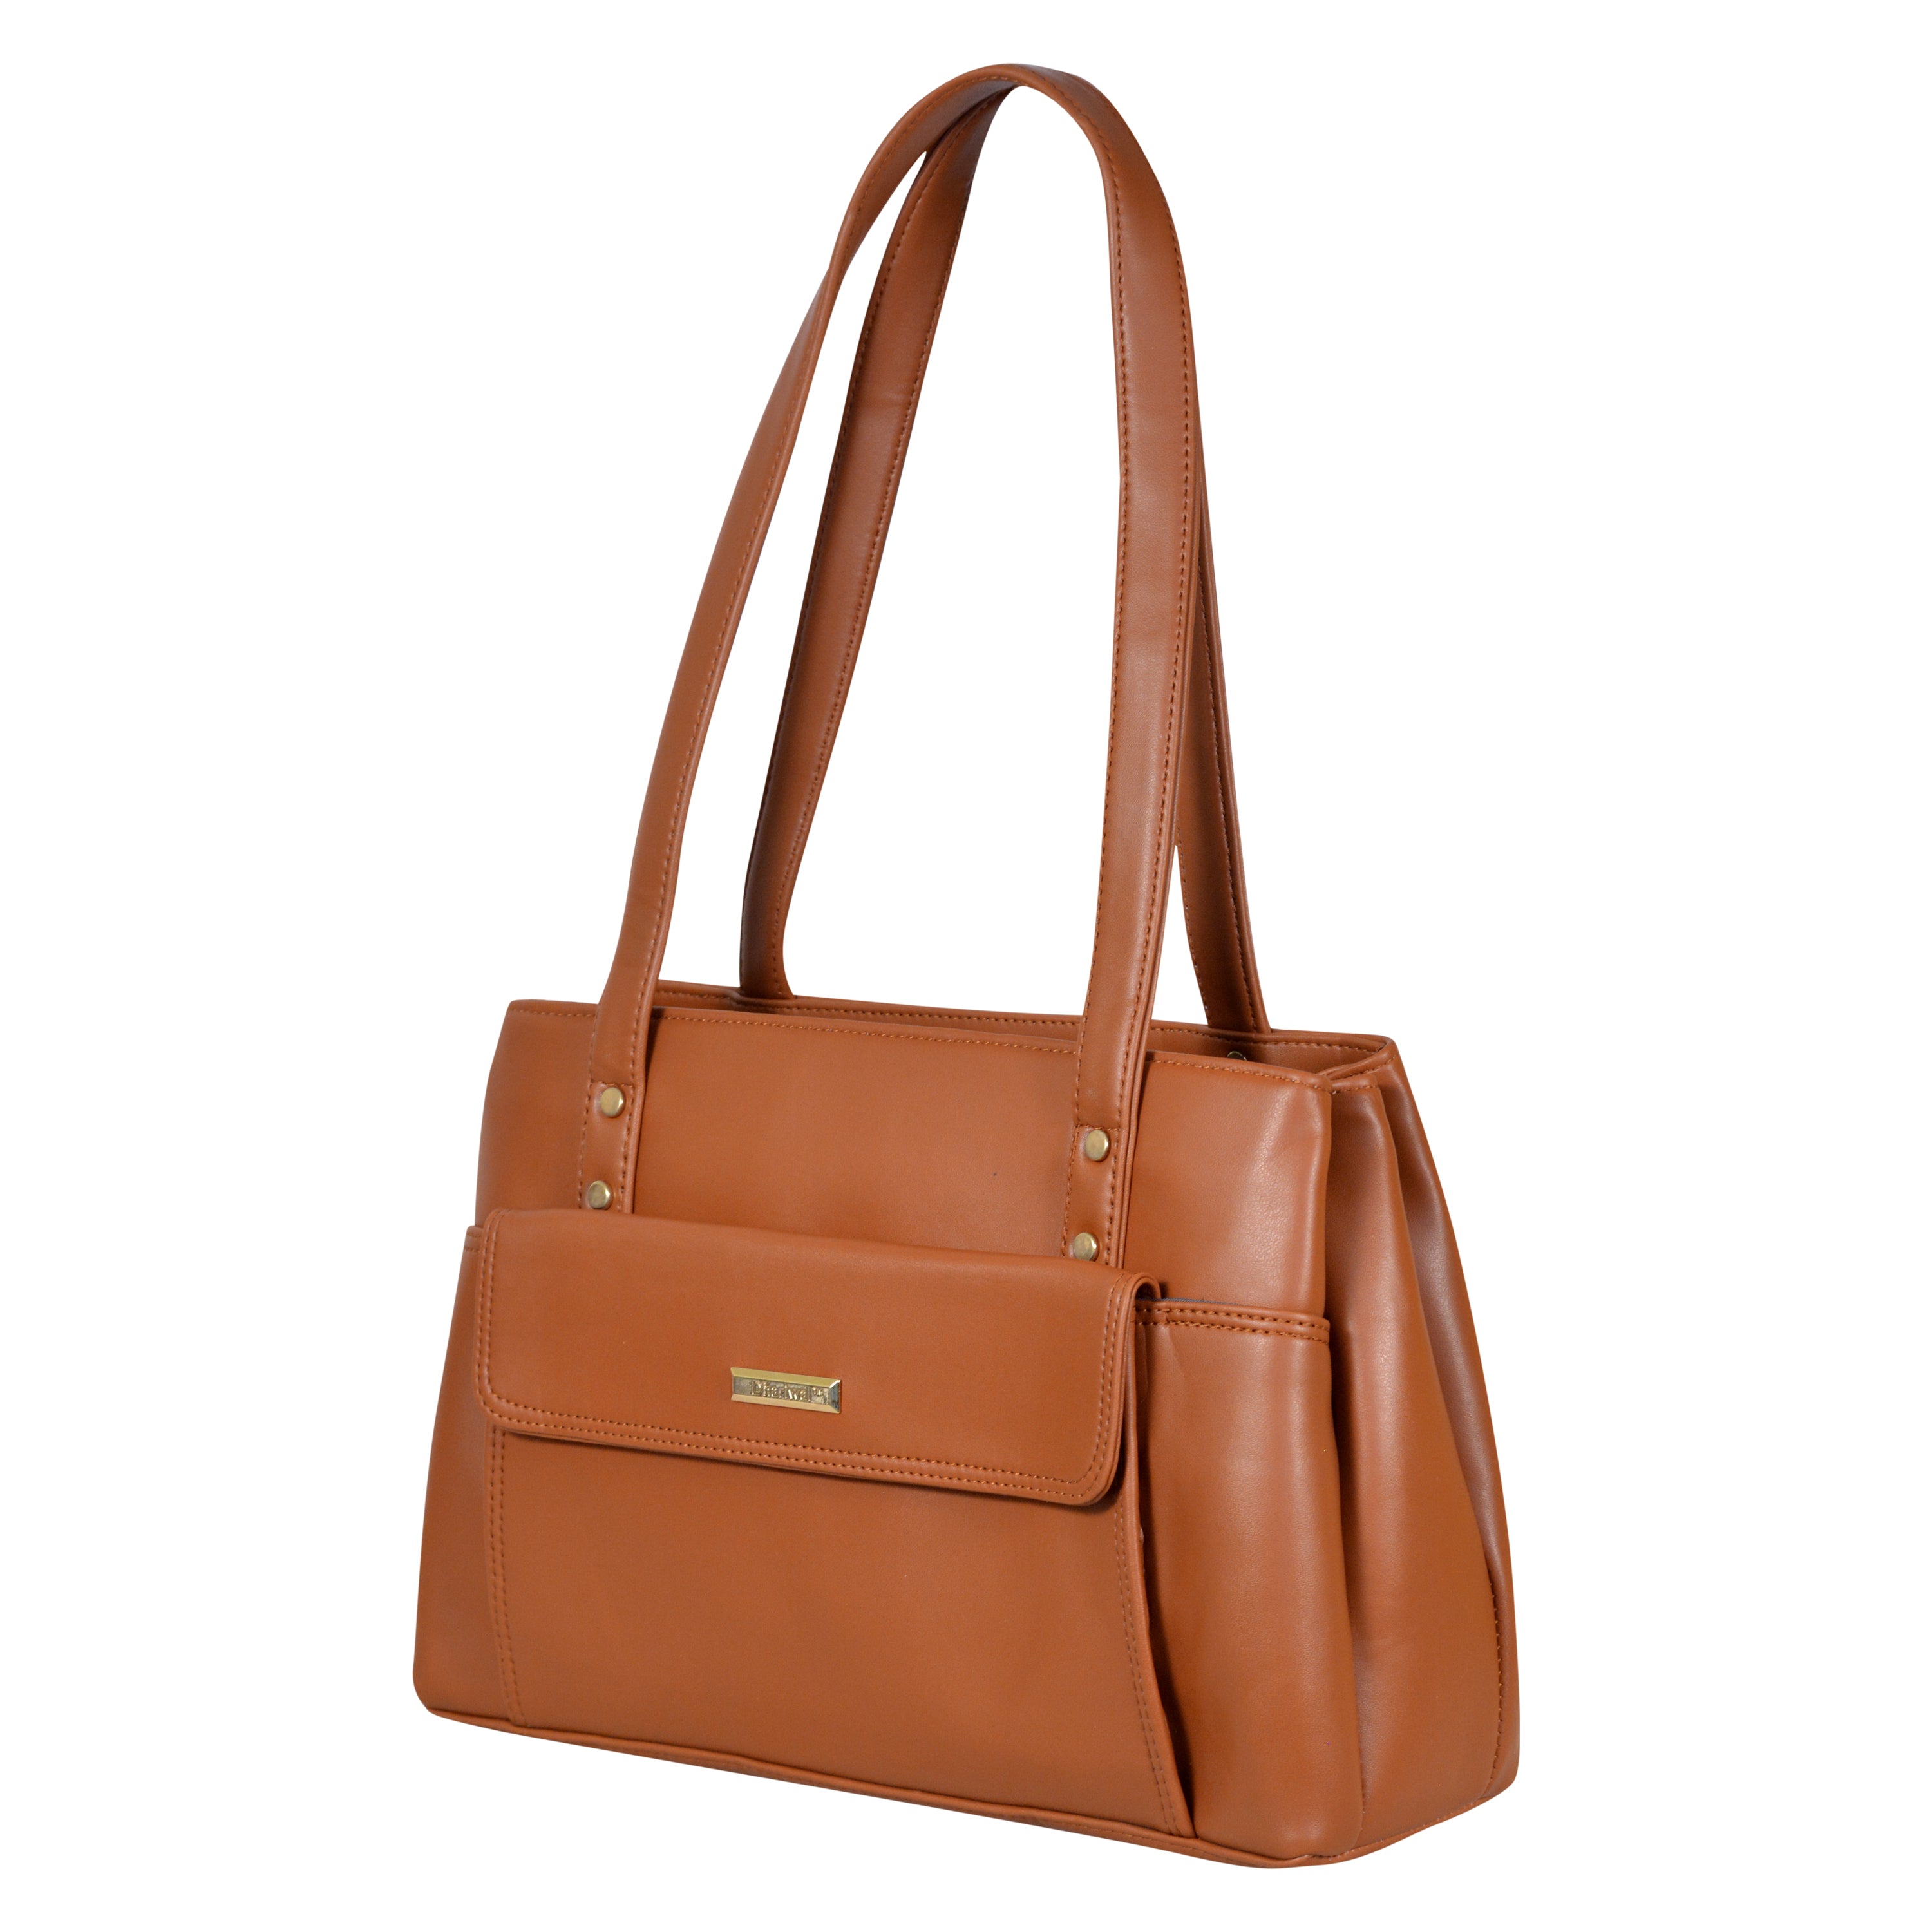 Shree Leather Laptop Bag  Buy Shree Leather Laptop Bag online in India